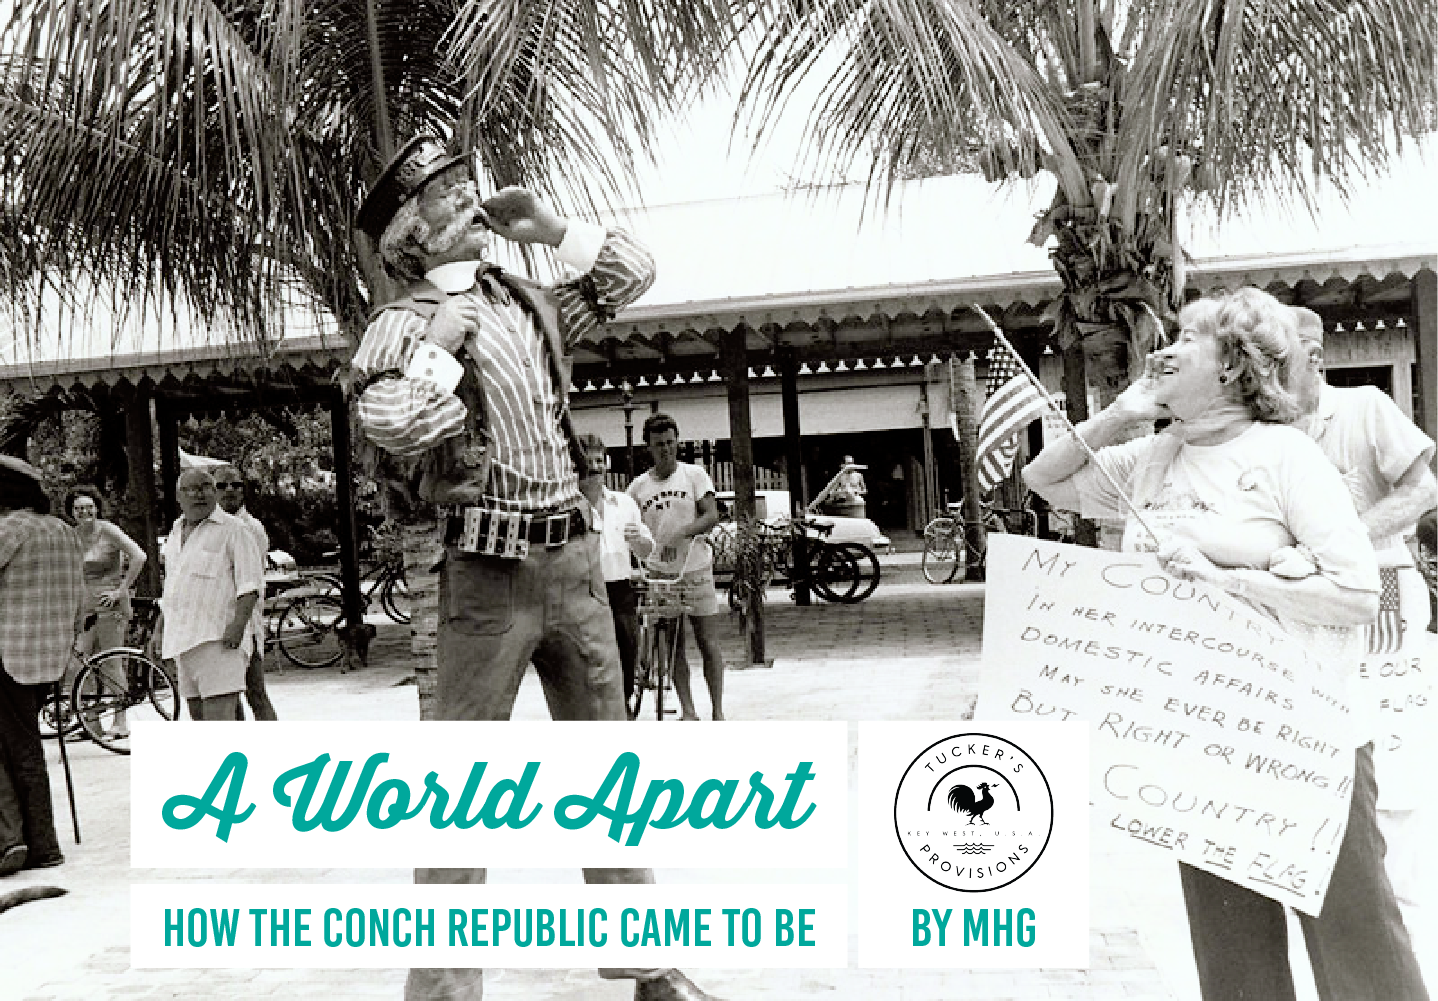 A WORLD APART - How the Conch Republic came to be.